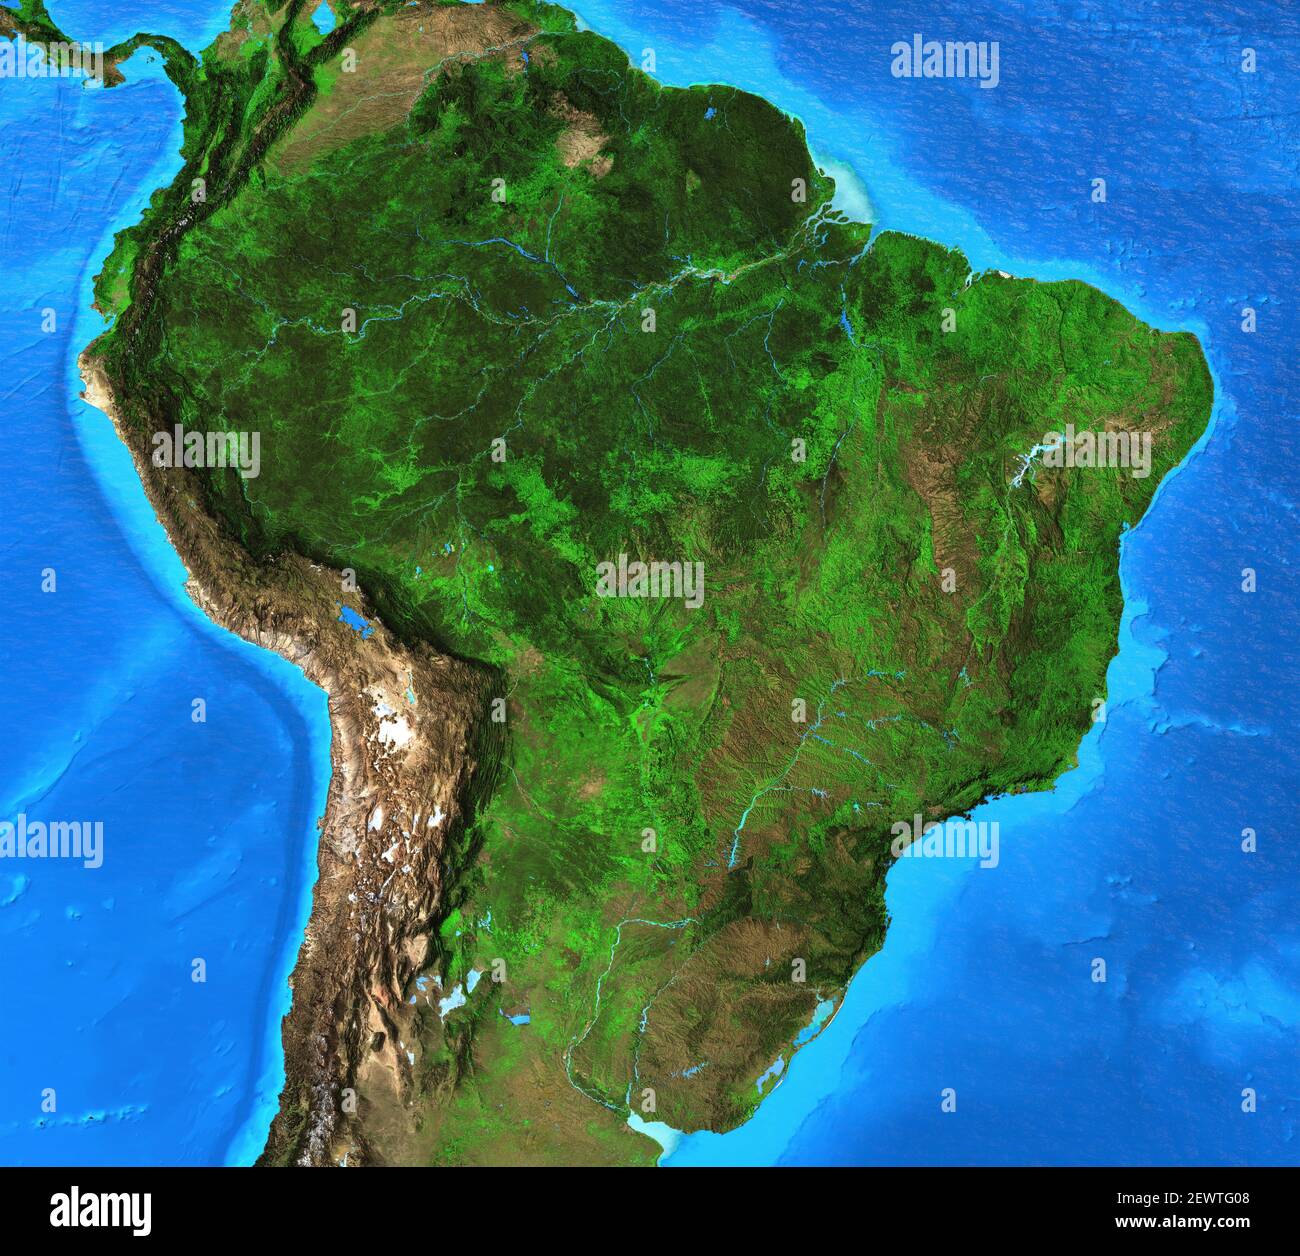 Brazil Geography High Resolution Stock Photography and Images - Alamy